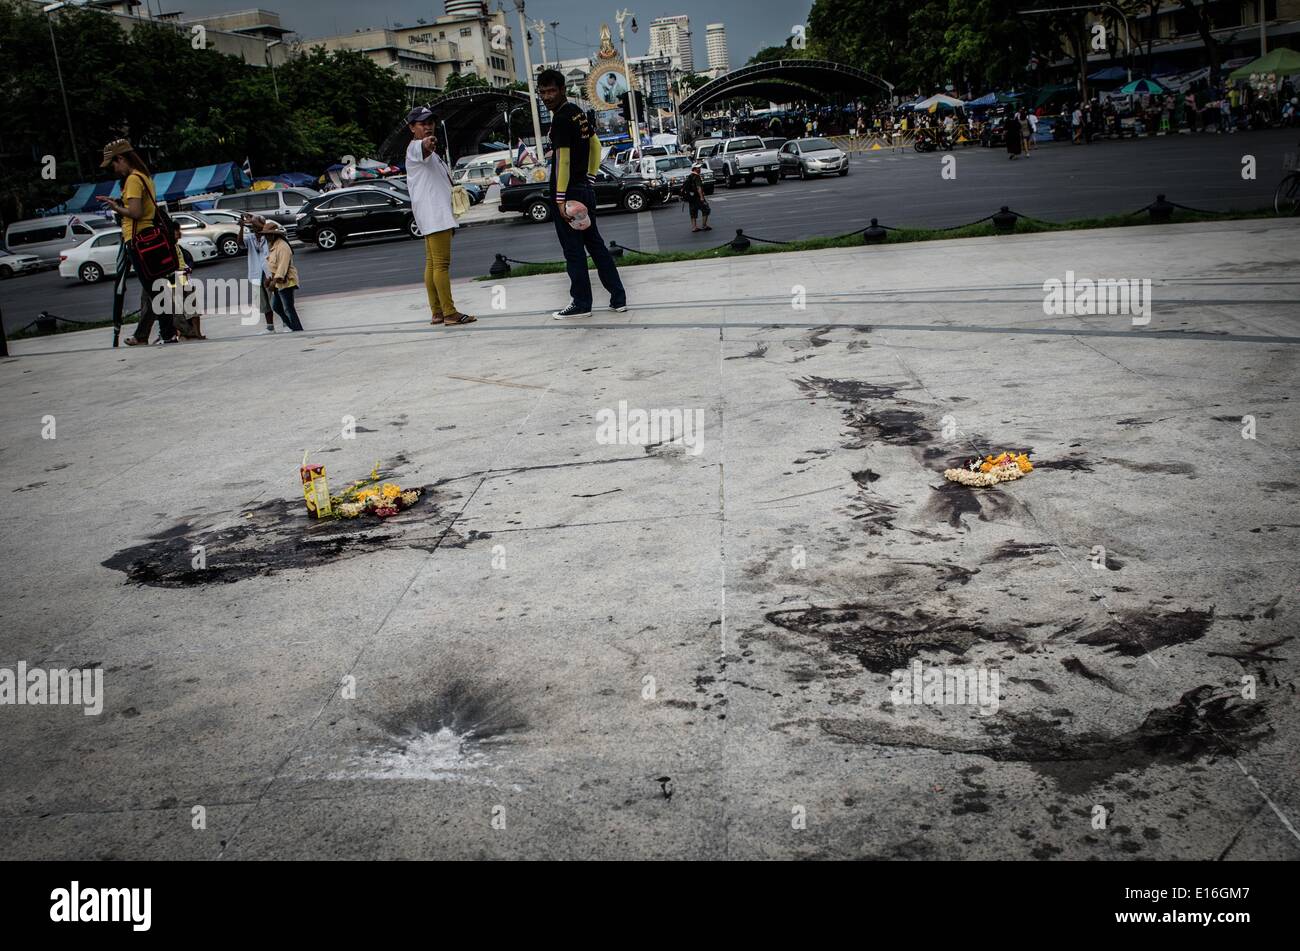 Bangkok, Thailand. 22nd Apr, 2014. A bloodstain where 3 people were shot dead and a hand grenade exploded in Bangkok. Thailand's army chief announced in a televised address to the nation on May 22 that the armed forces were seizing power after months of deadly political turmoil. The commander-in-chief, who invoked martial law on Tuesday, said the coup was needed to prevent the conflict escalating. © George Nickels/NurPhoto/ZUMAPRESS.com/Alamy Live News Stock Photo